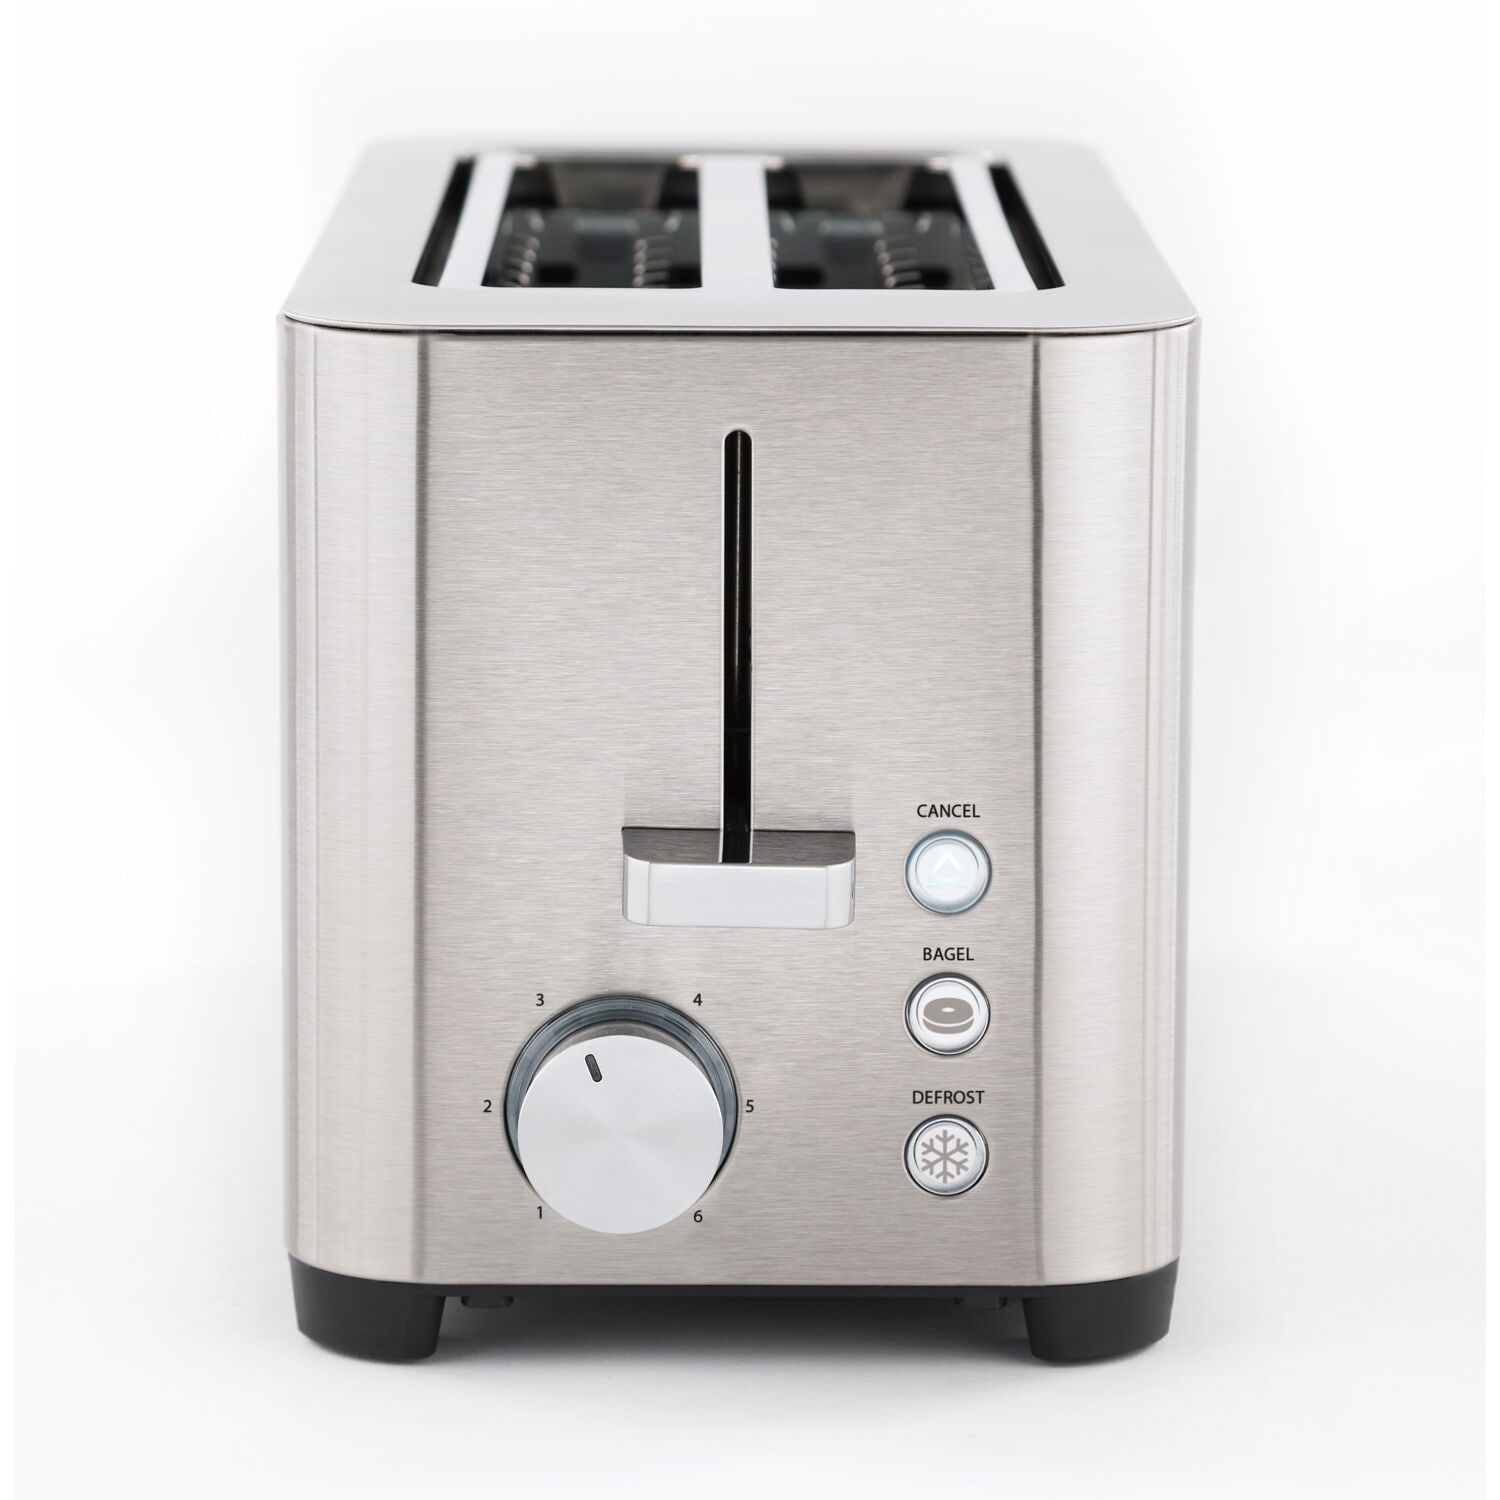 Toaster, 4-Slice, Wide Slot, Stainless Steel - Professional Series